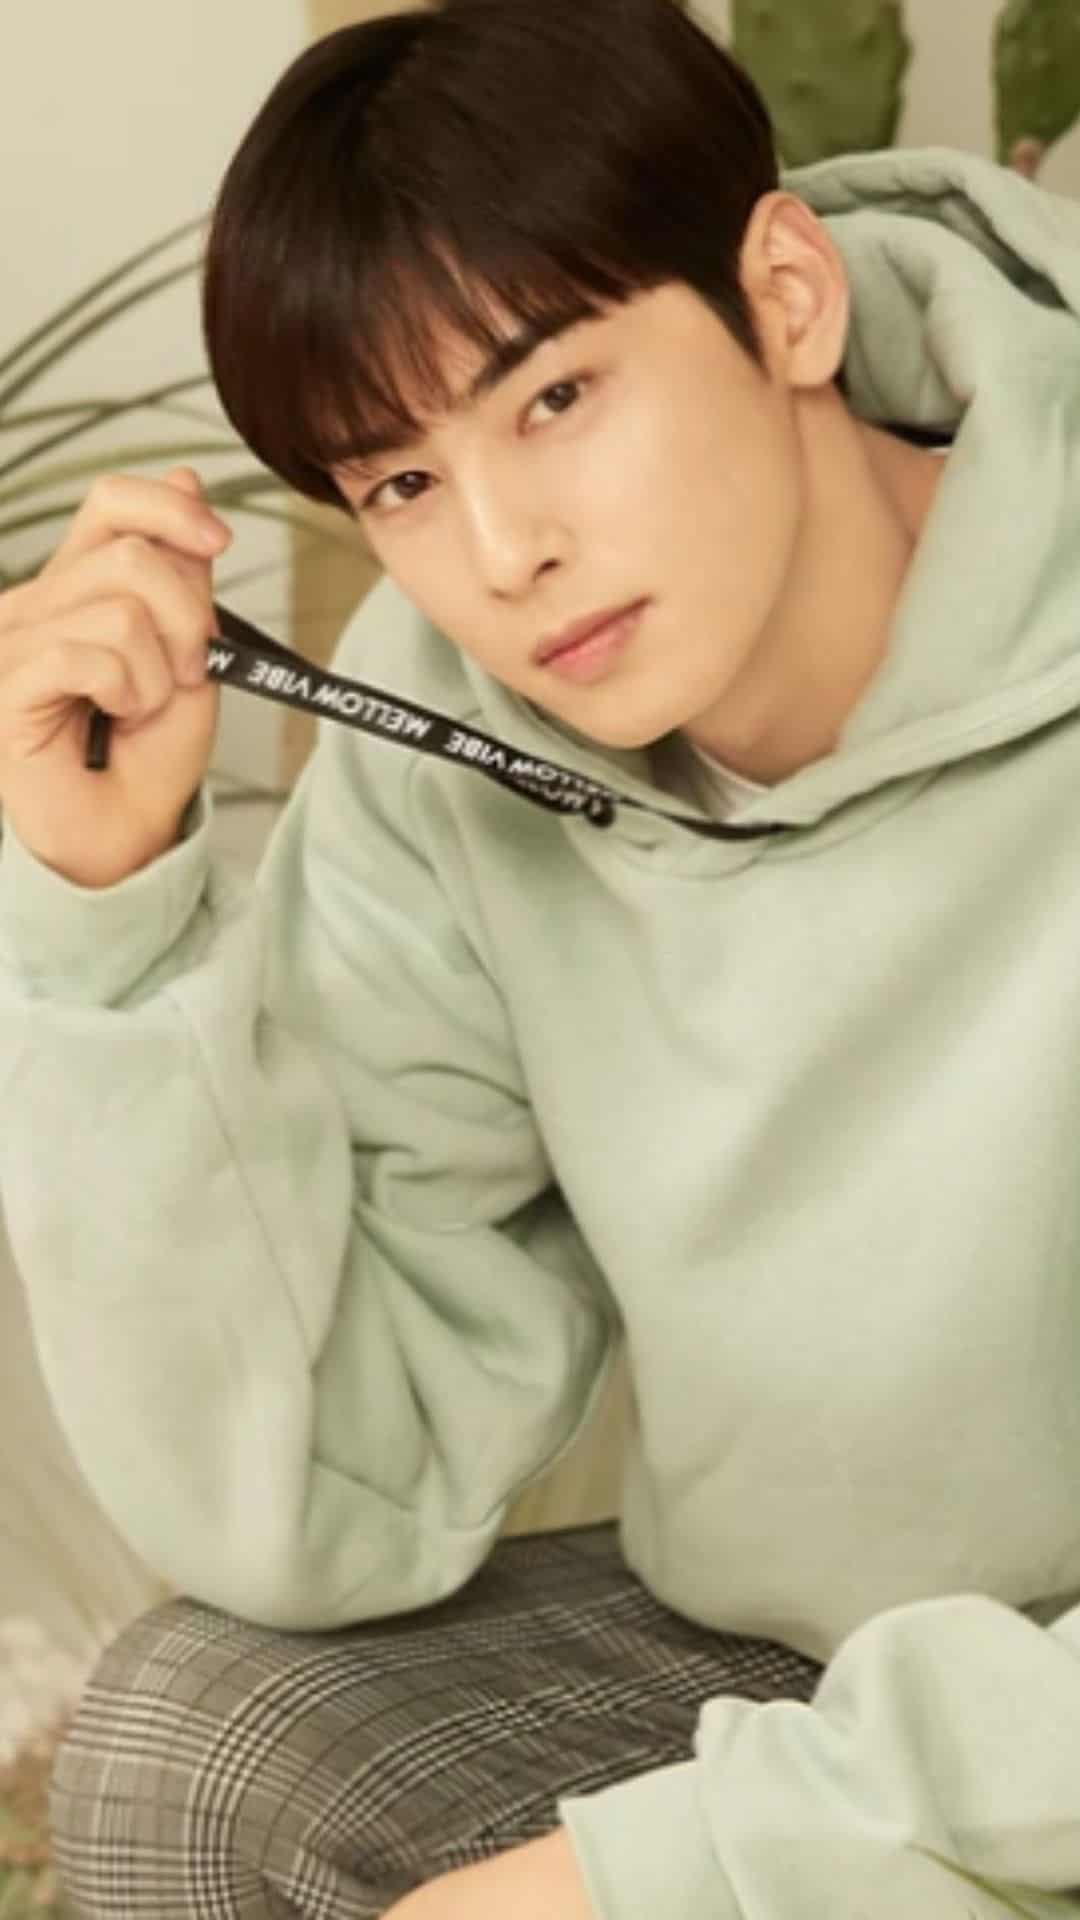 ASTRO's Cha Eun Woo Is The New Face Of Philippine Clothing Brand Penshoppe